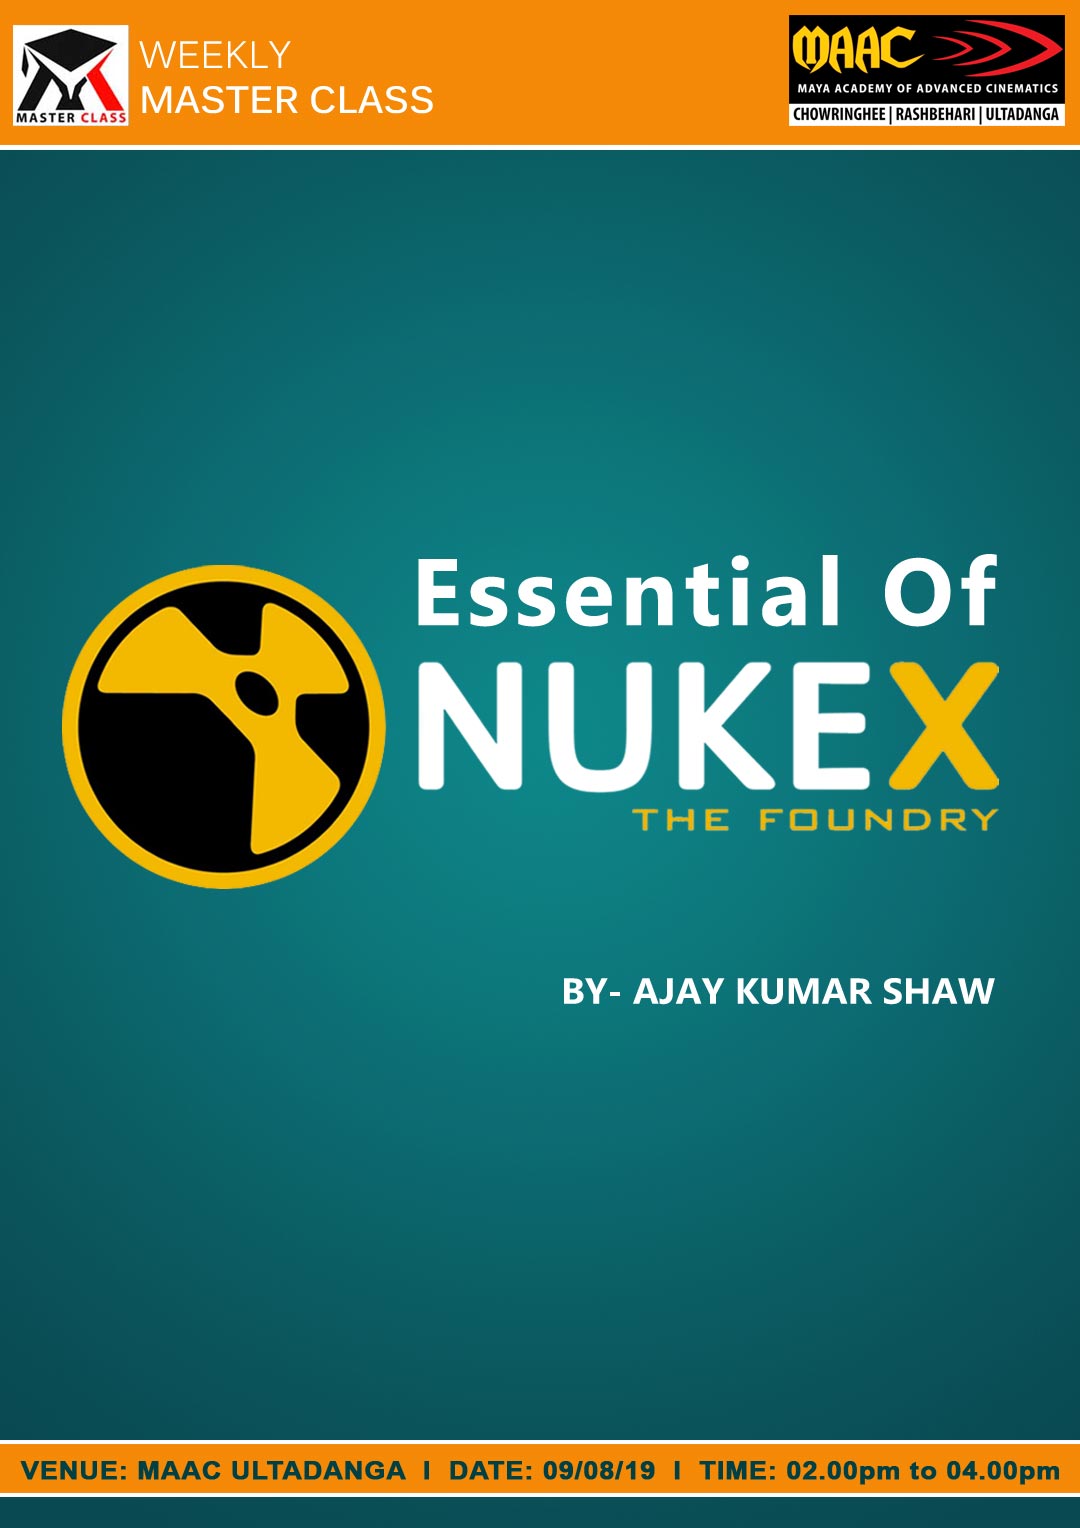 Weekly Master Class on Essential Of Nuke